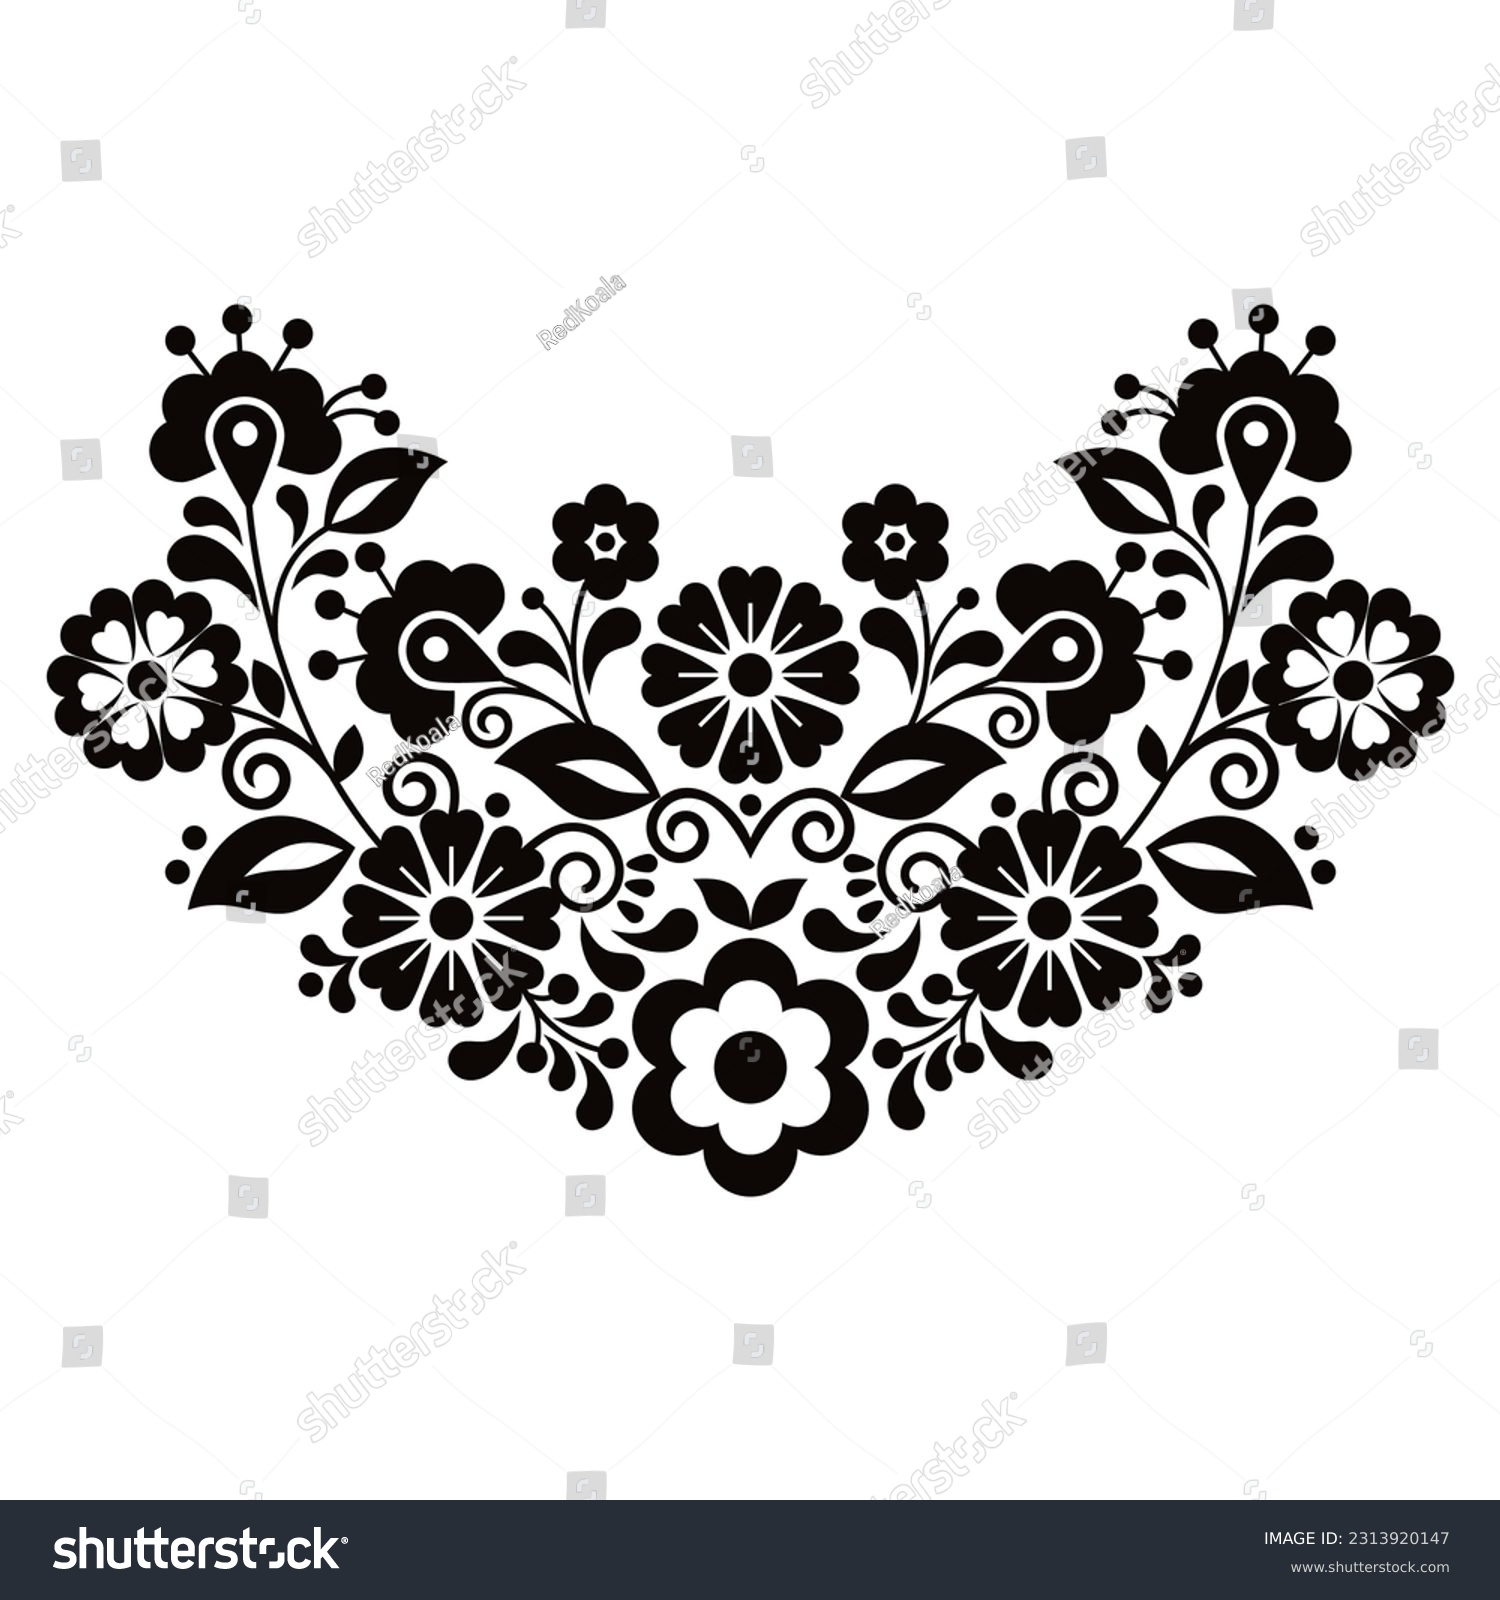 SVG of Mexican vibrant folk art style vector pattern with flowers, half wreath shaped floral design inspired by traditional embroidery from Mexico in black and white. Decorative ornament with monochrome  svg